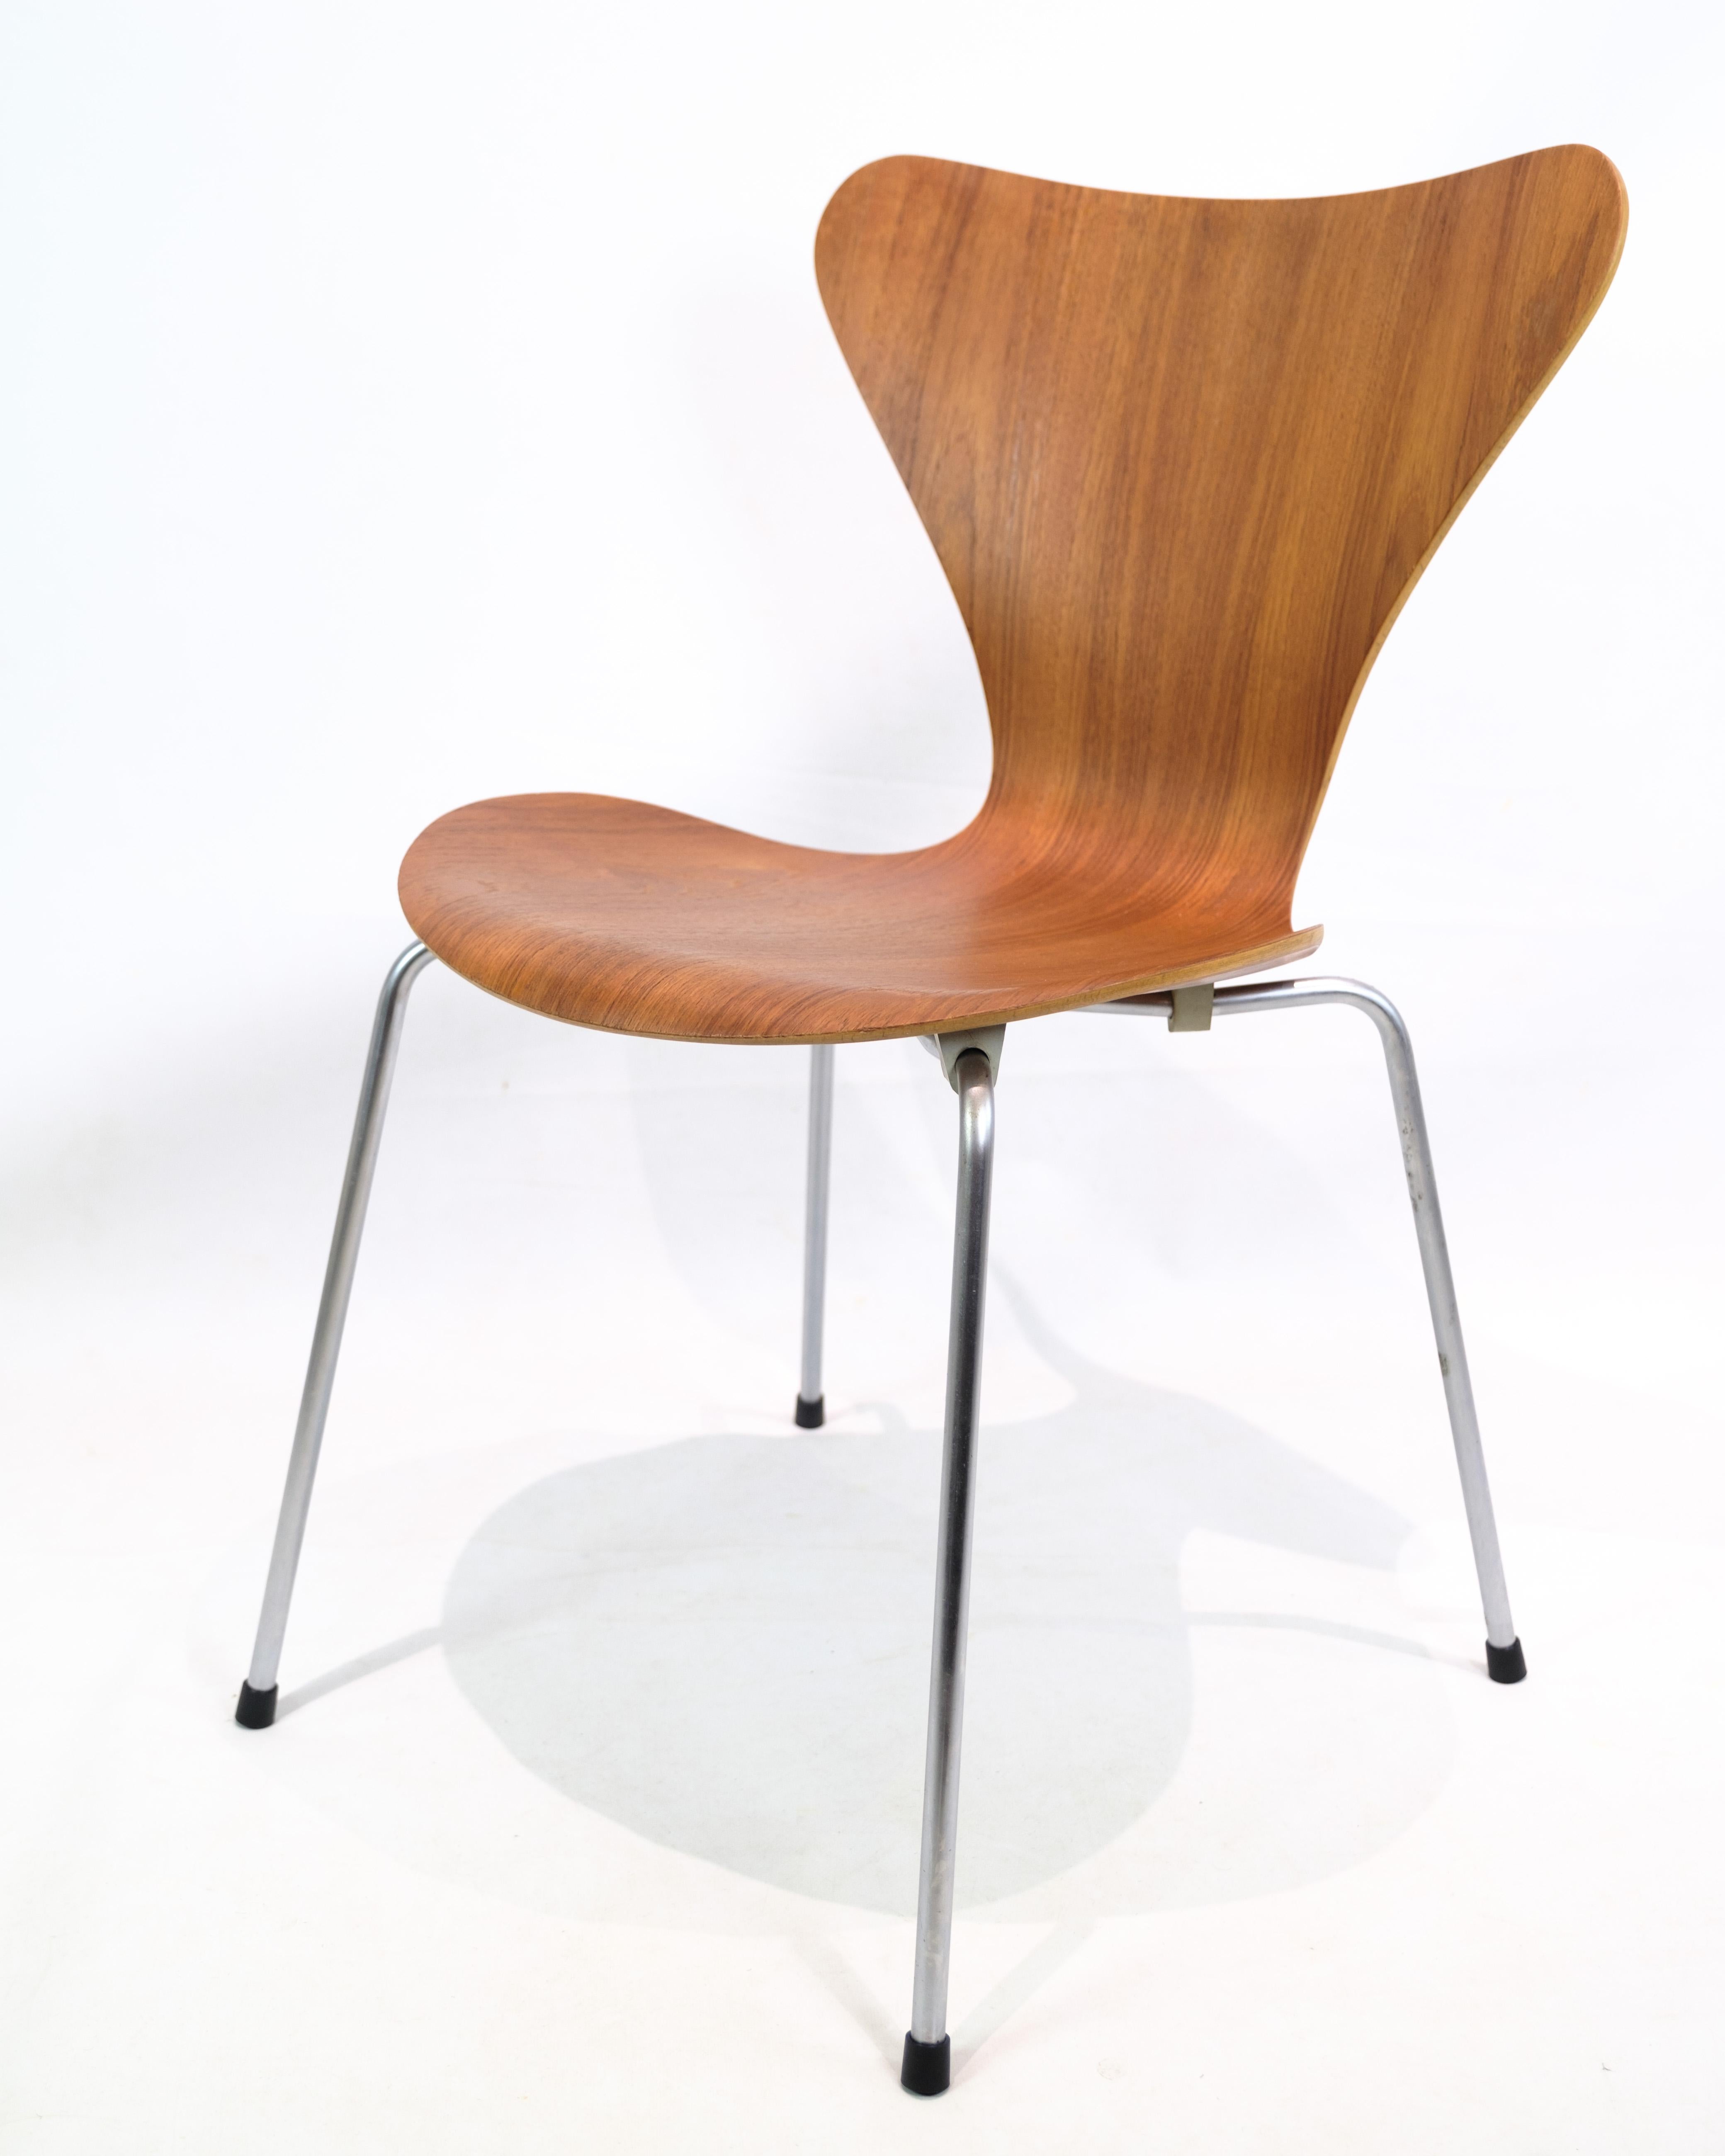 Set of 4 Seven Chairs In Teak wood by Arne Jacobsen and Fritz Hansen from 1960 For Sale 4